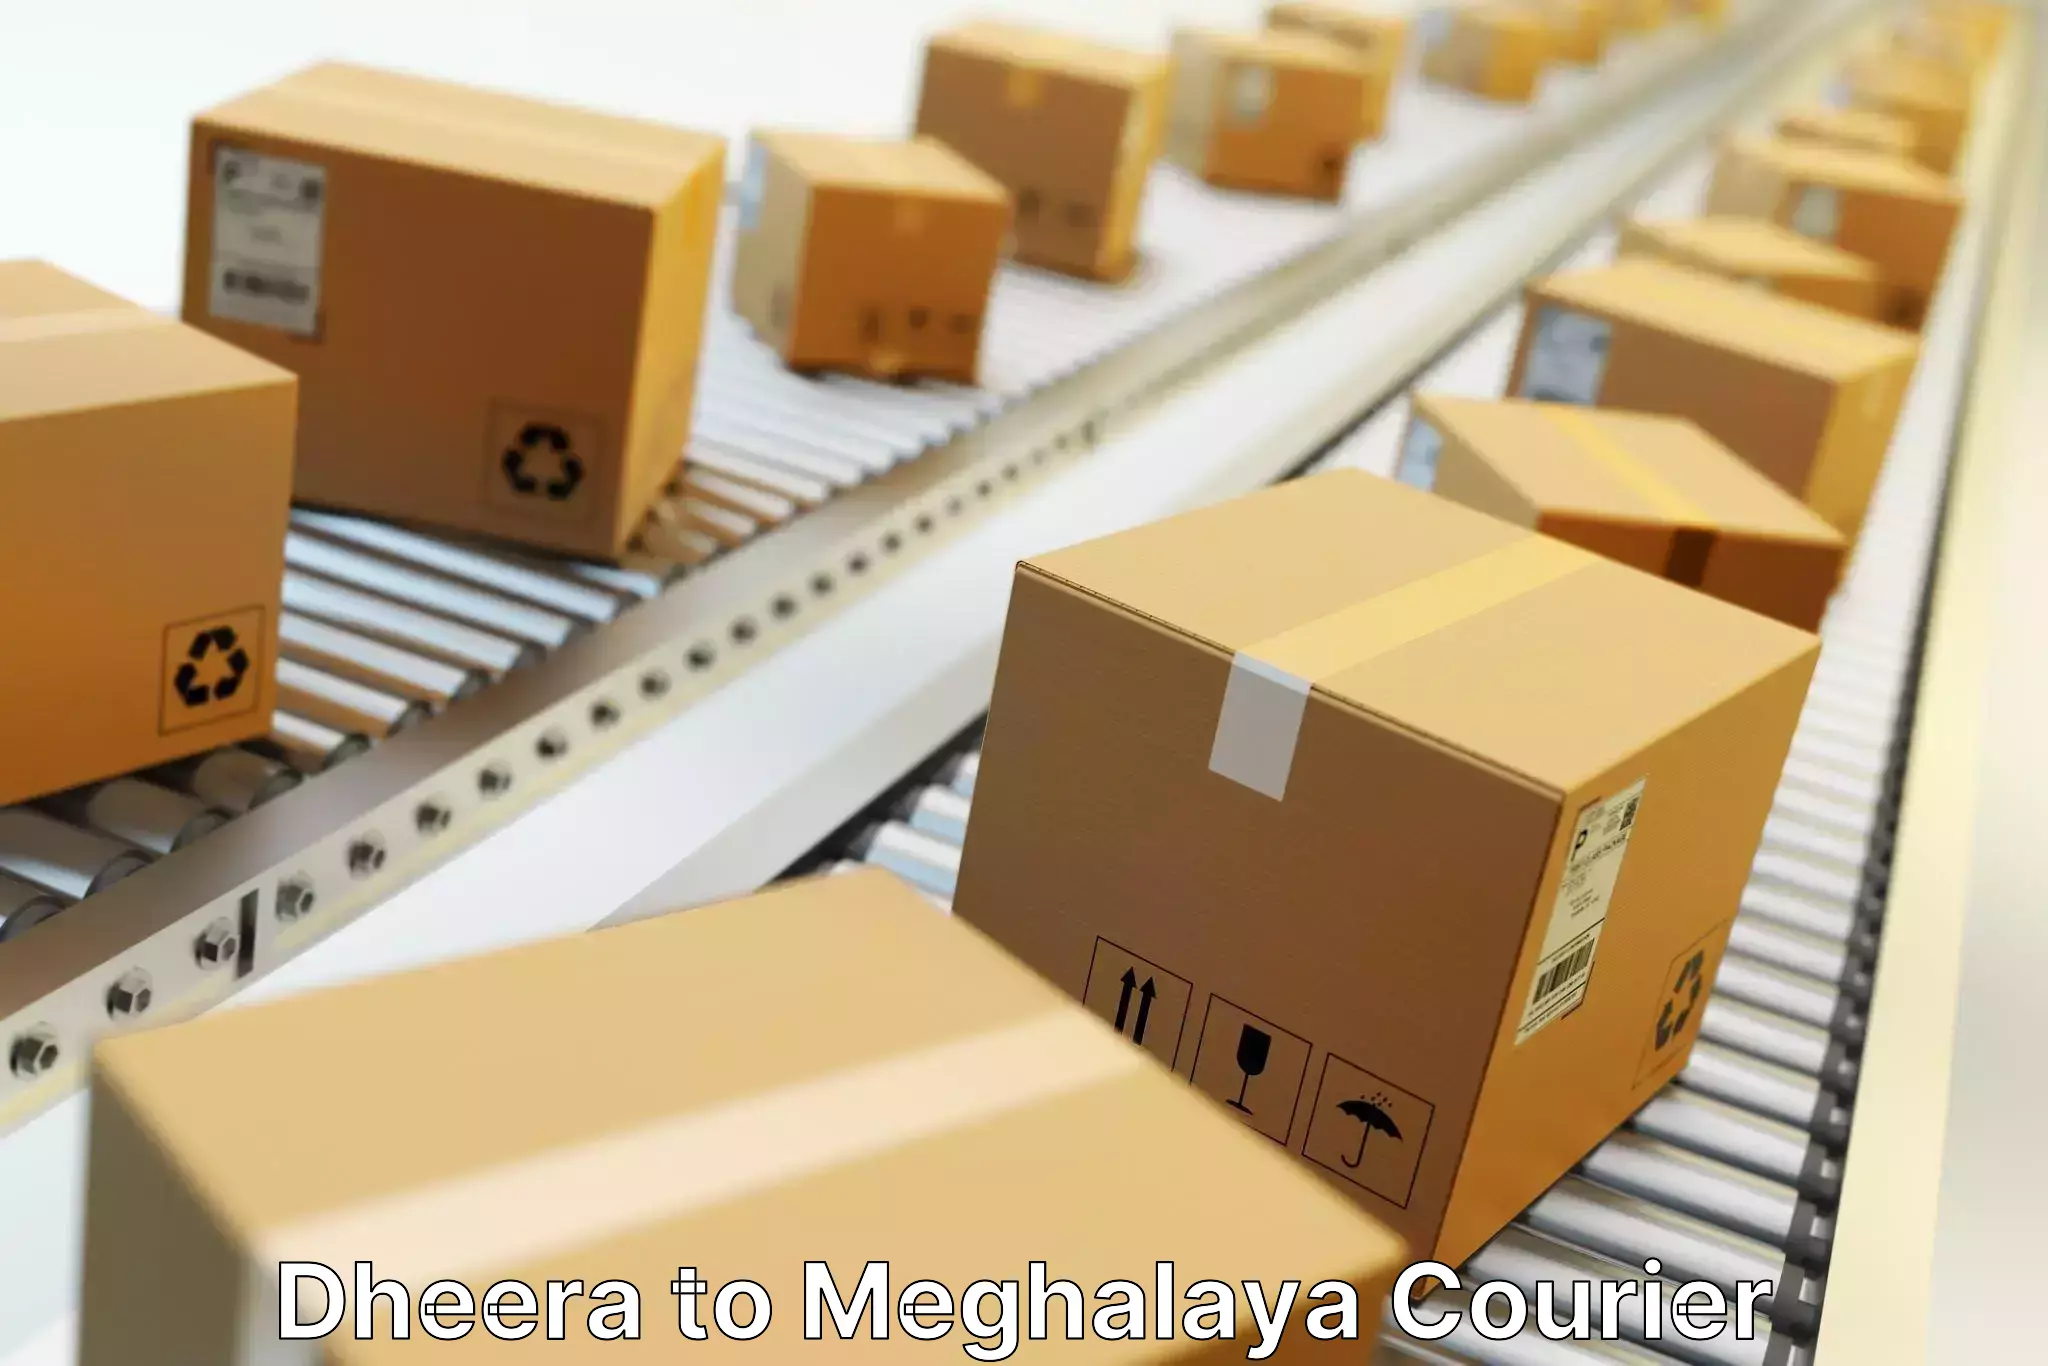 Overnight delivery services Dheera to Meghalaya